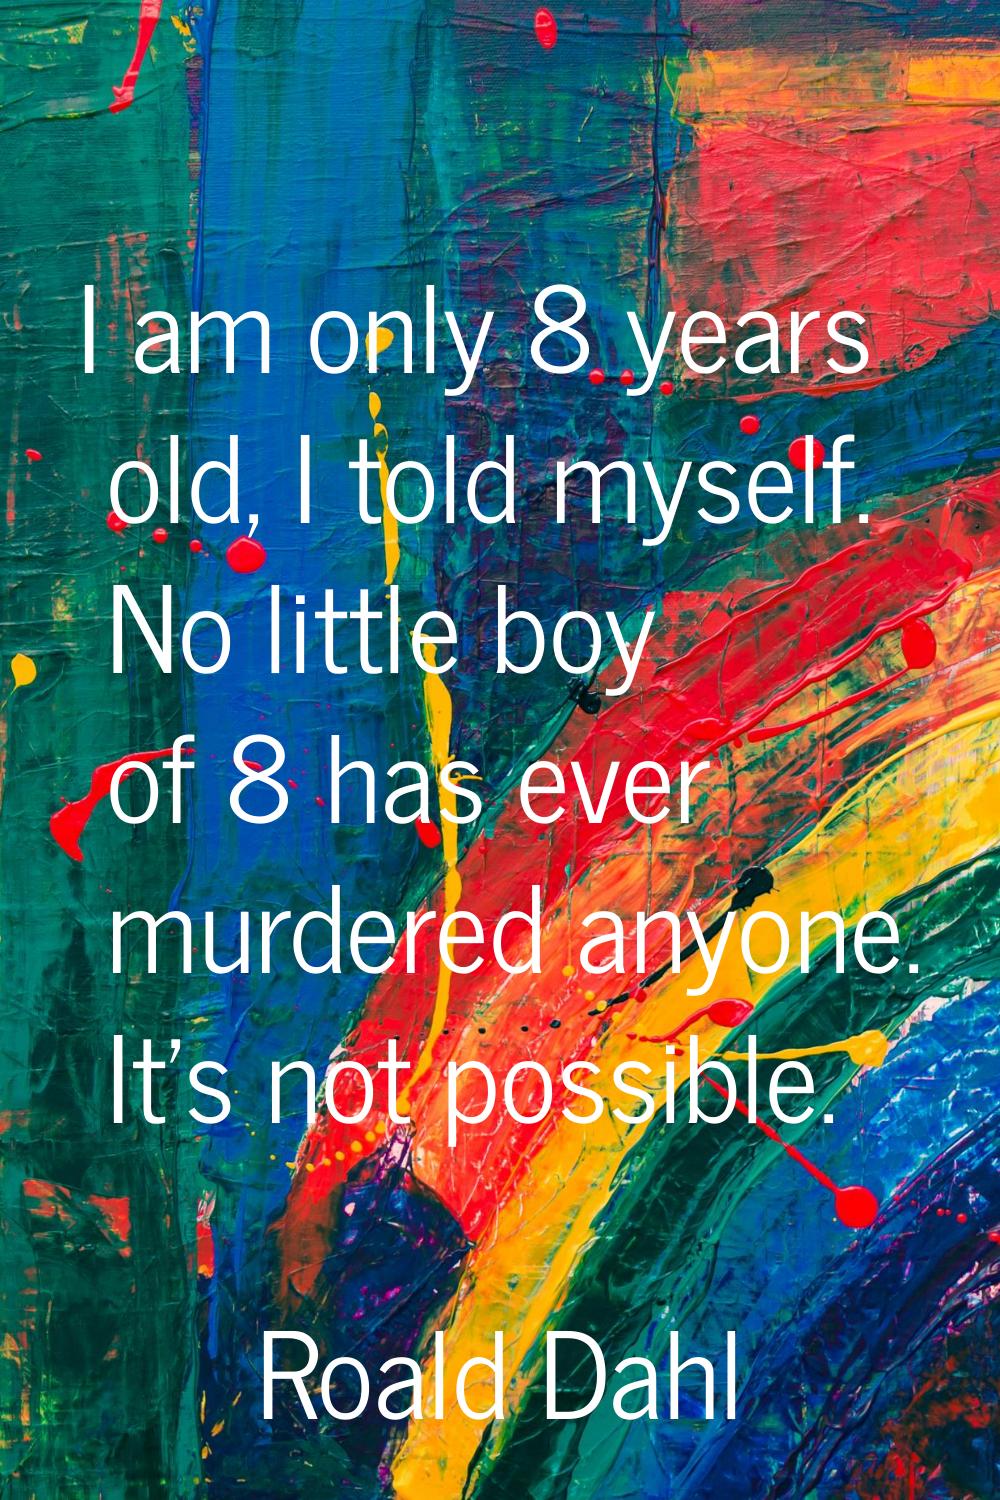 I am only 8 years old, I told myself. No little boy of 8 has ever murdered anyone. It's not possibl